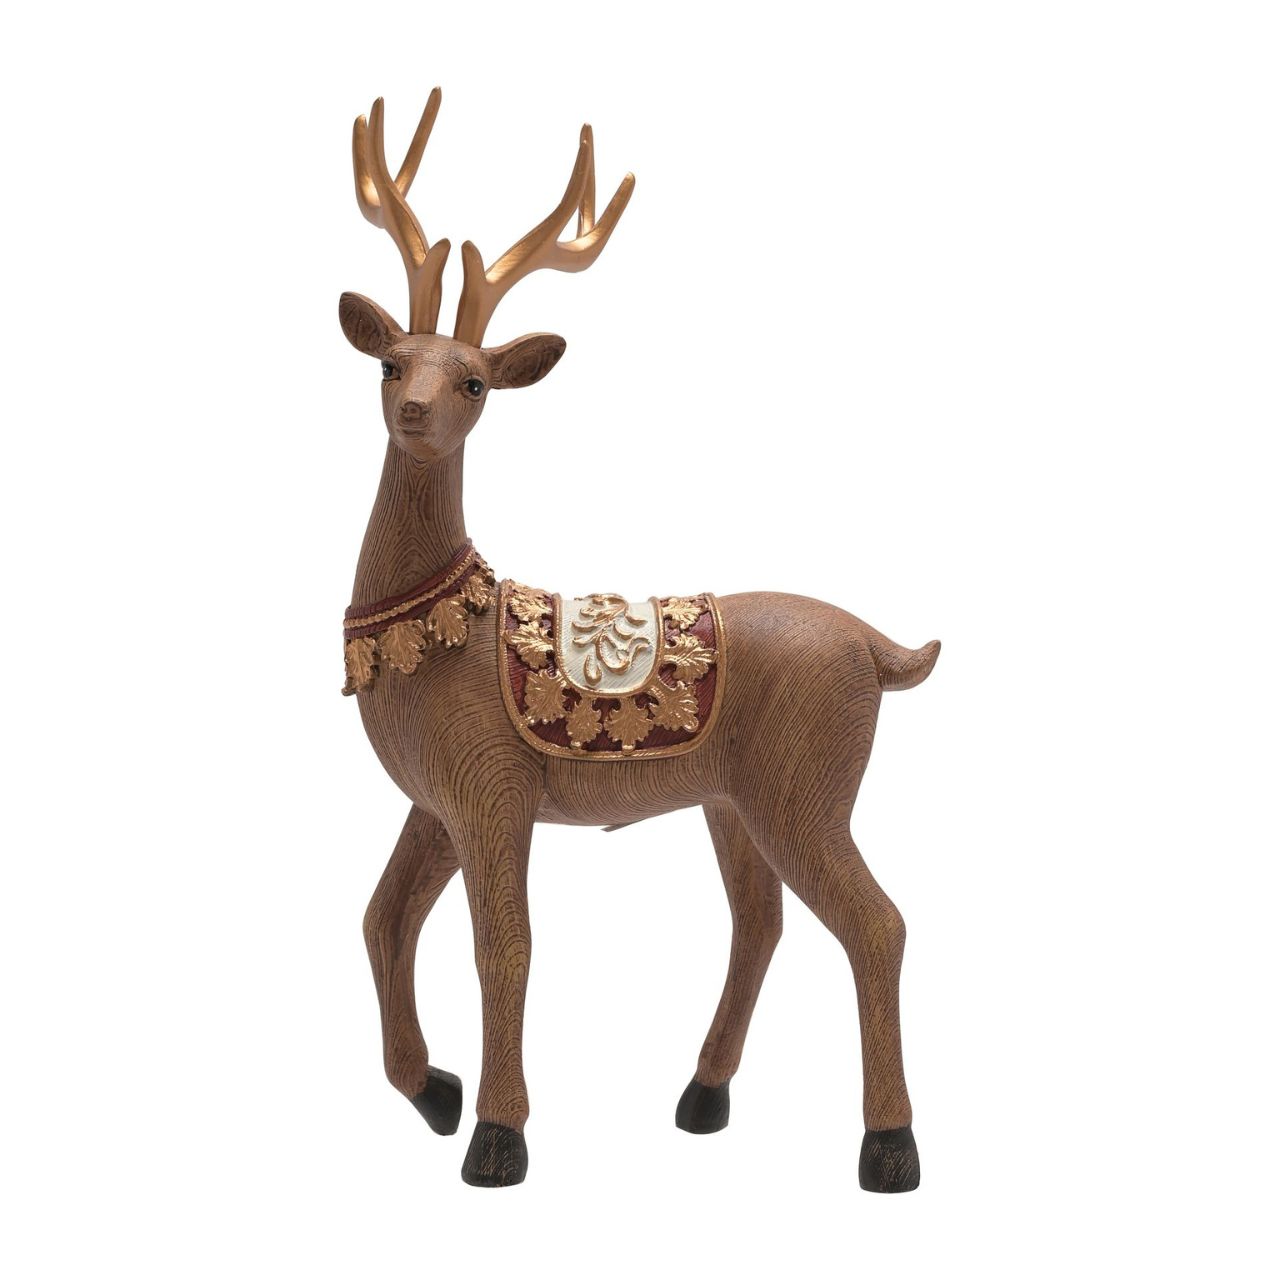 Christmas Standing Reindeer Decoration  A standing Christmas reindeer.  This charming Christmas decoration perfectly blends traditional and modern touches this festive season.